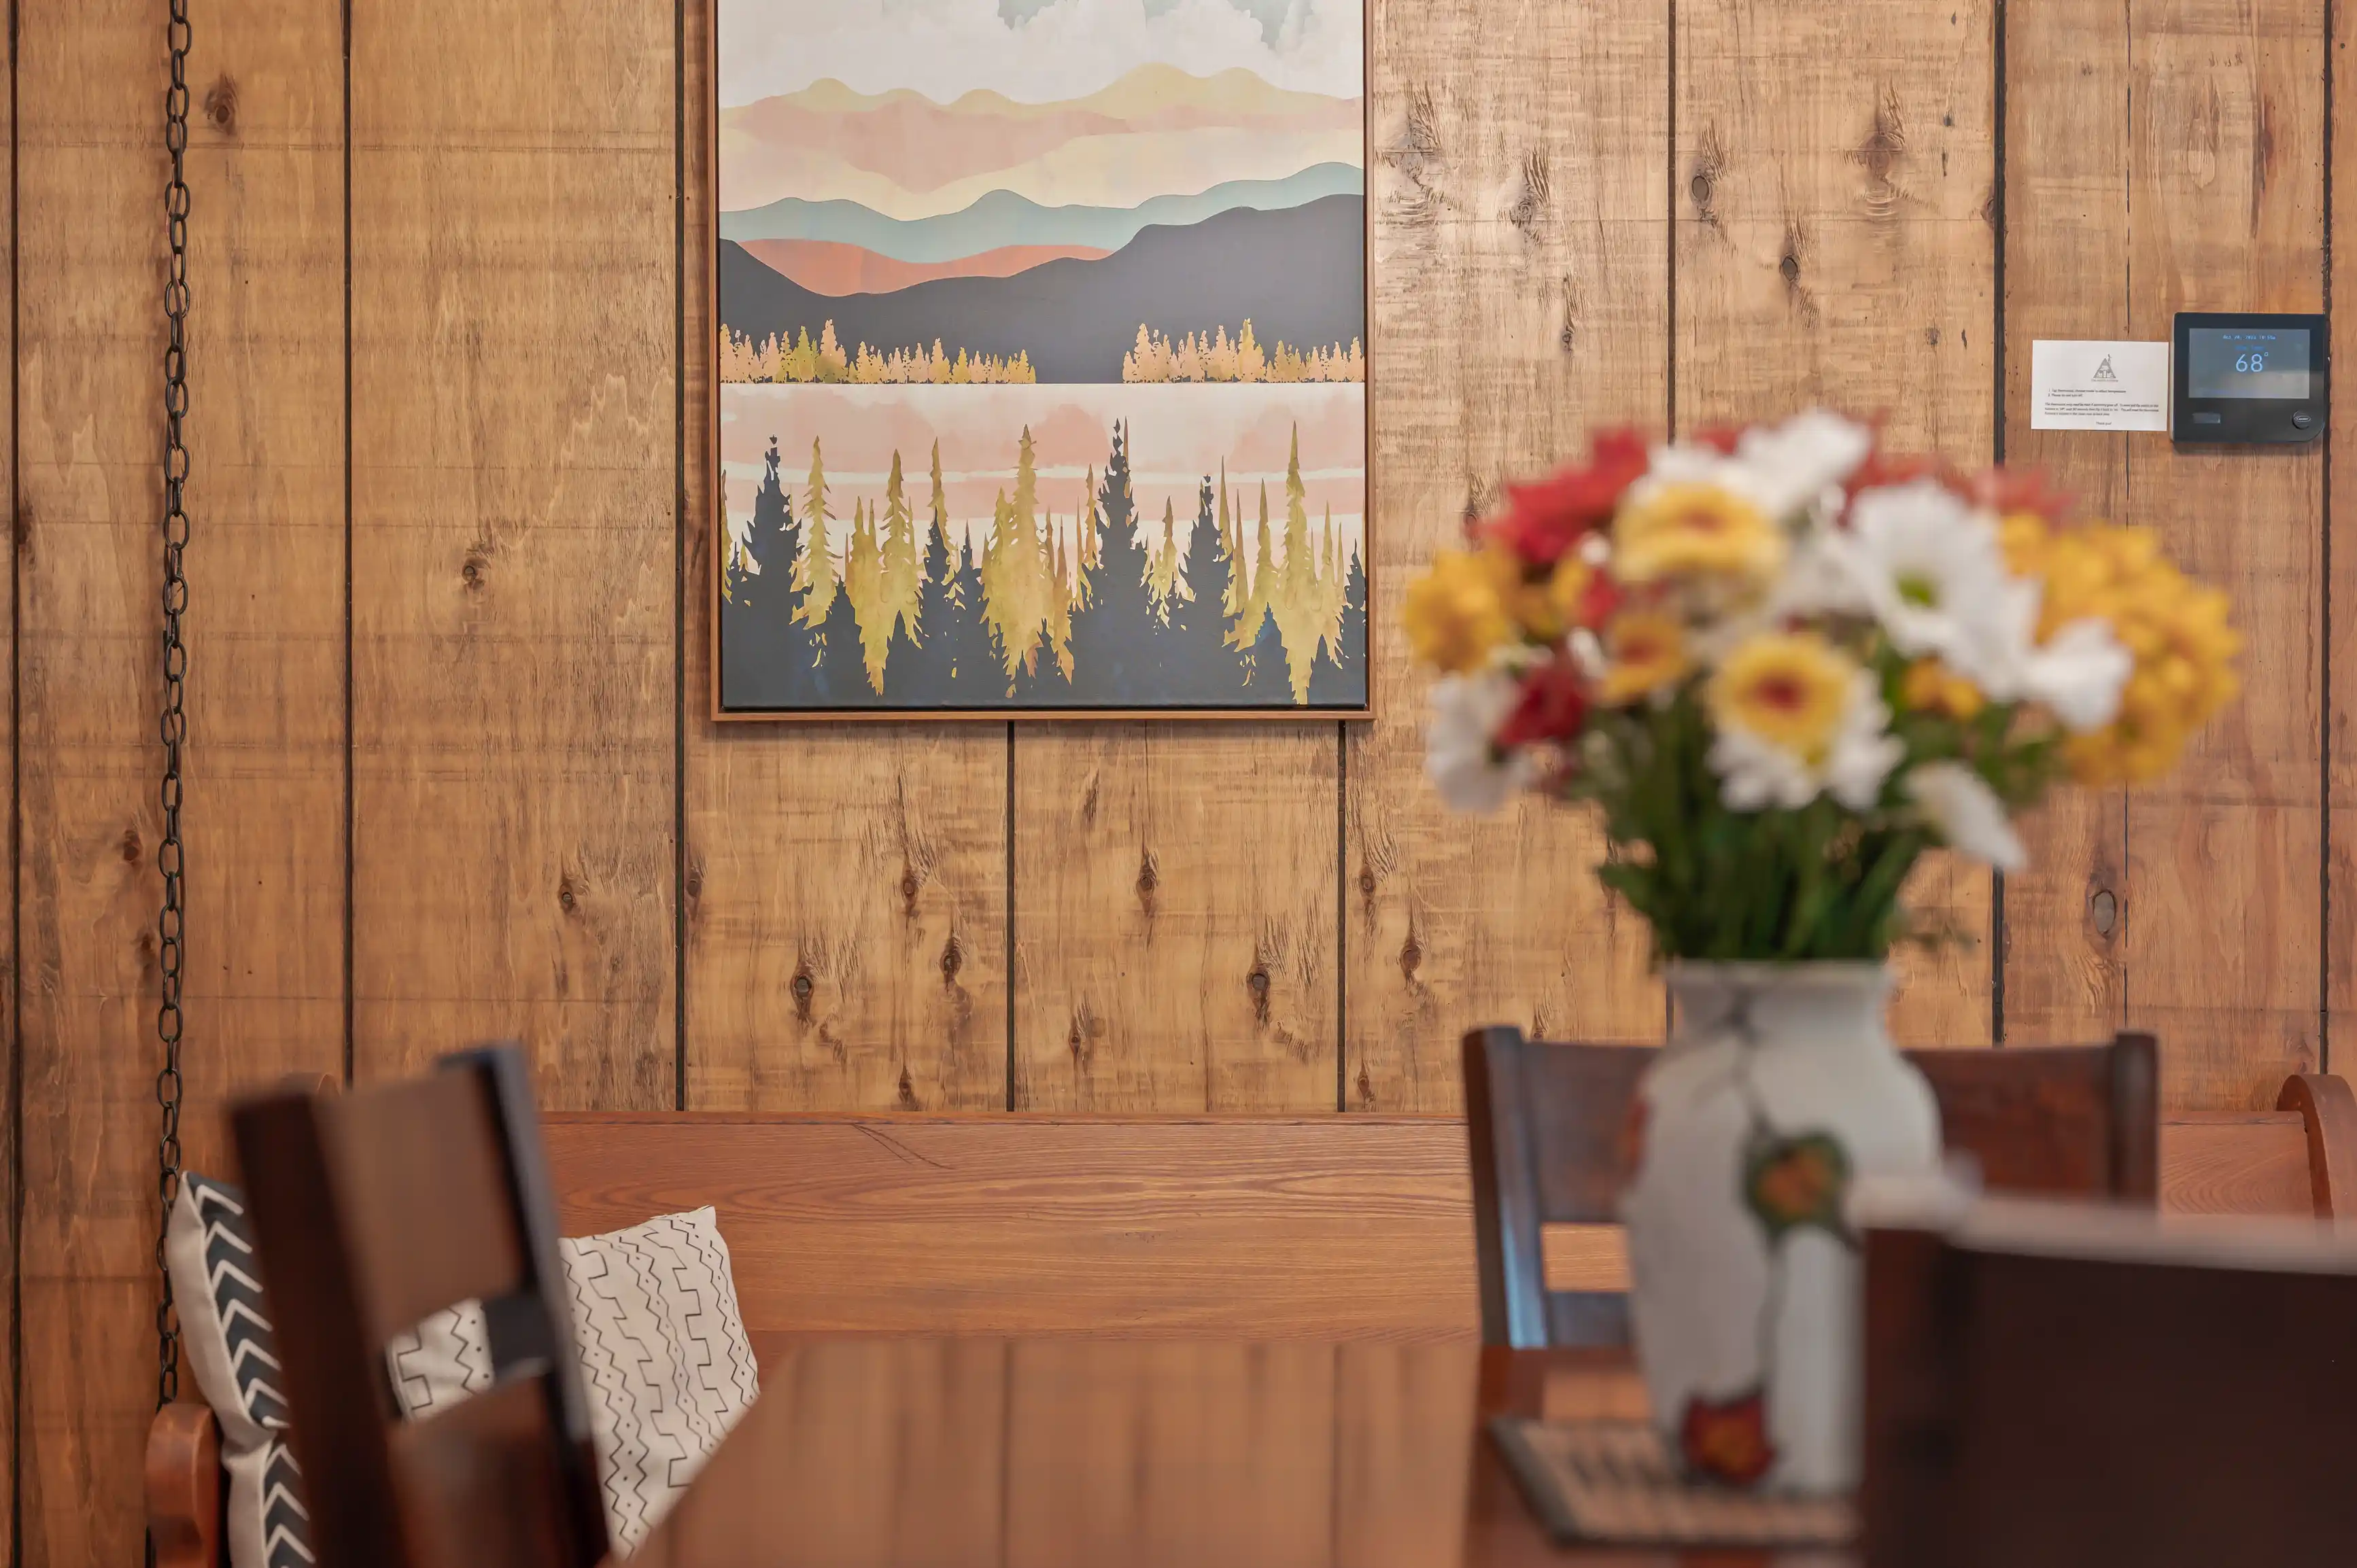 An interior view of a cozy room with wooden walls, a landscape painting hanging on the wall, a wooden table with chairs, and a vase of colorful flowers in the foreground.